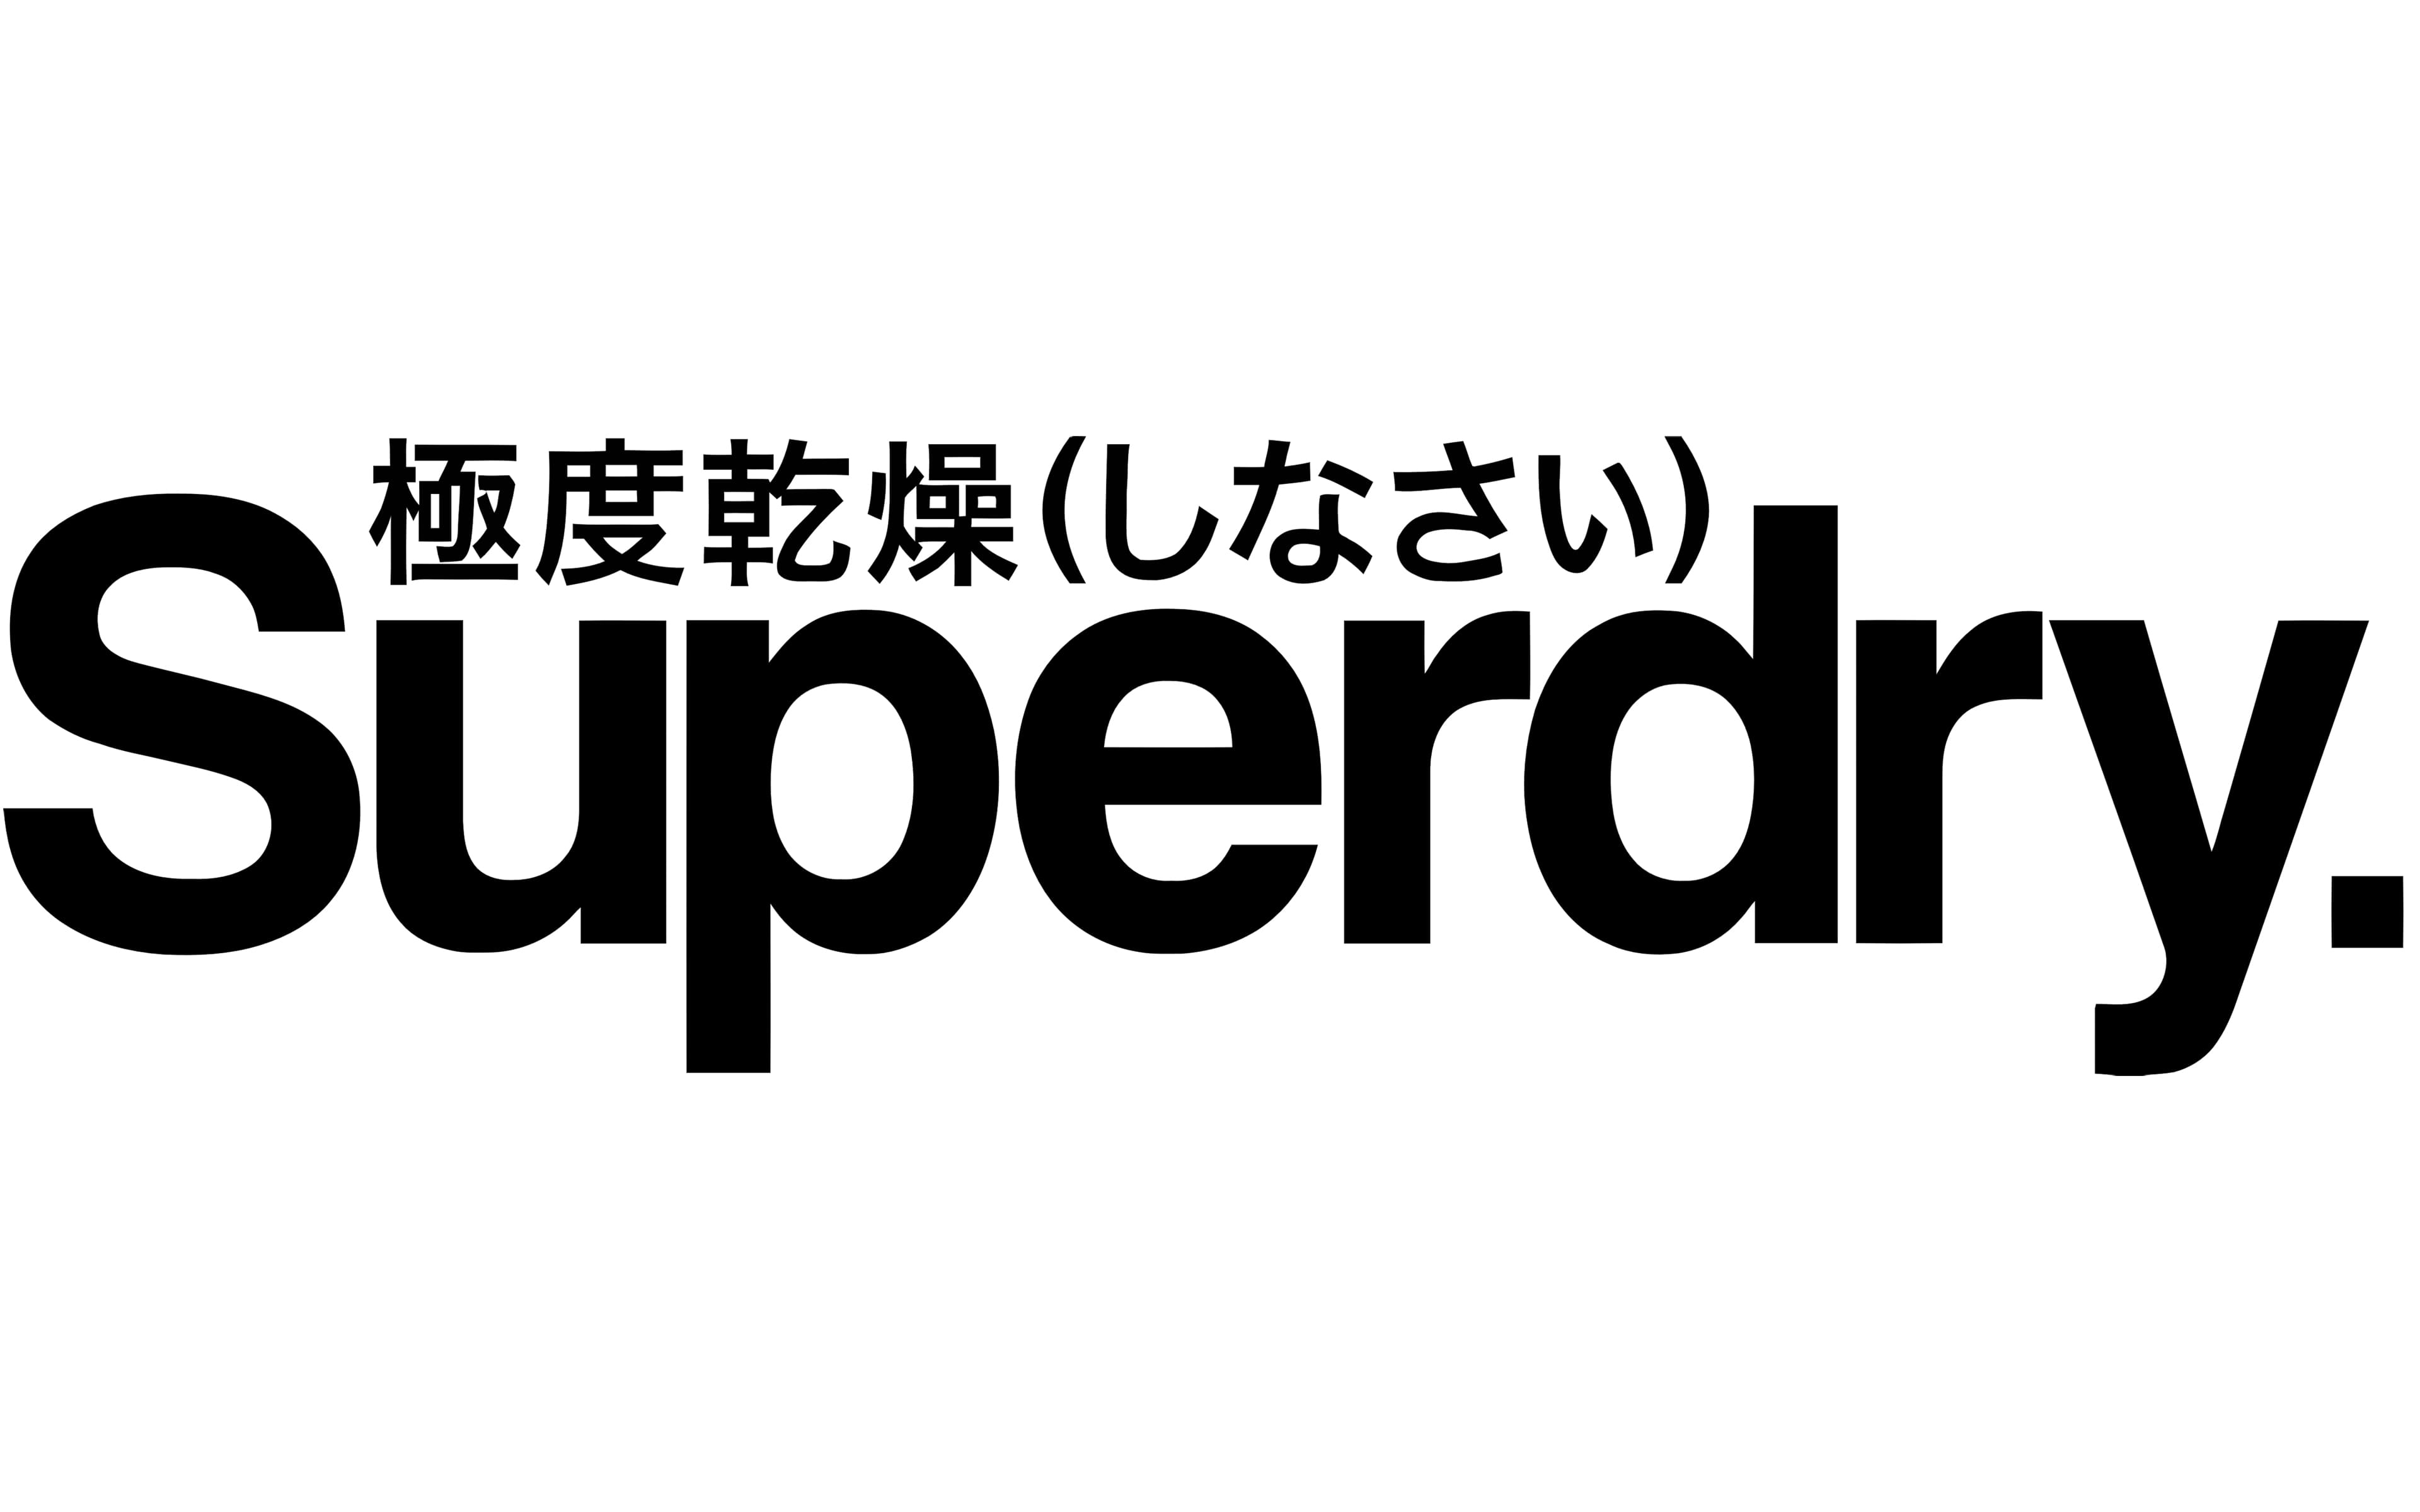 Superdry Logo Brand and Orange Sign Text for Store of British Fashion  Clothing Company Editorial Image - Image of front, city: 218256850